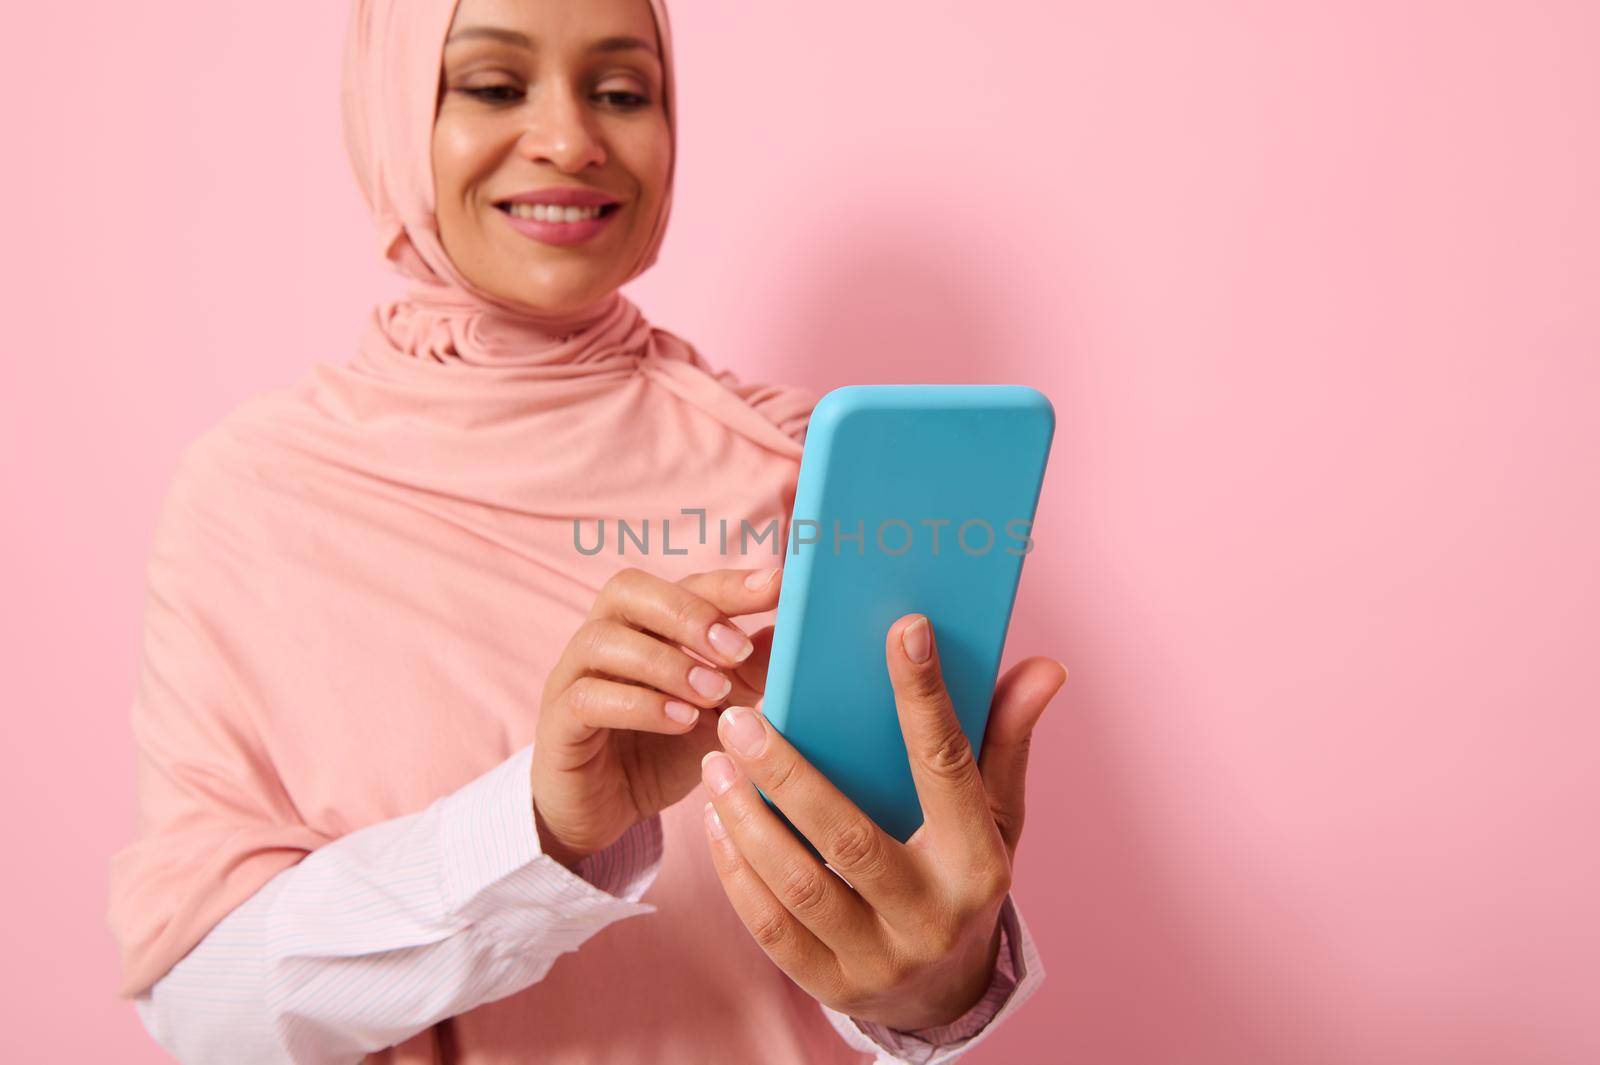 Close-up portrait of confident Arab Muslim mature pretty woman in strict religious outfit and covered head in pink hijab texting message on a mobile phone in her hands, colored background, copy space